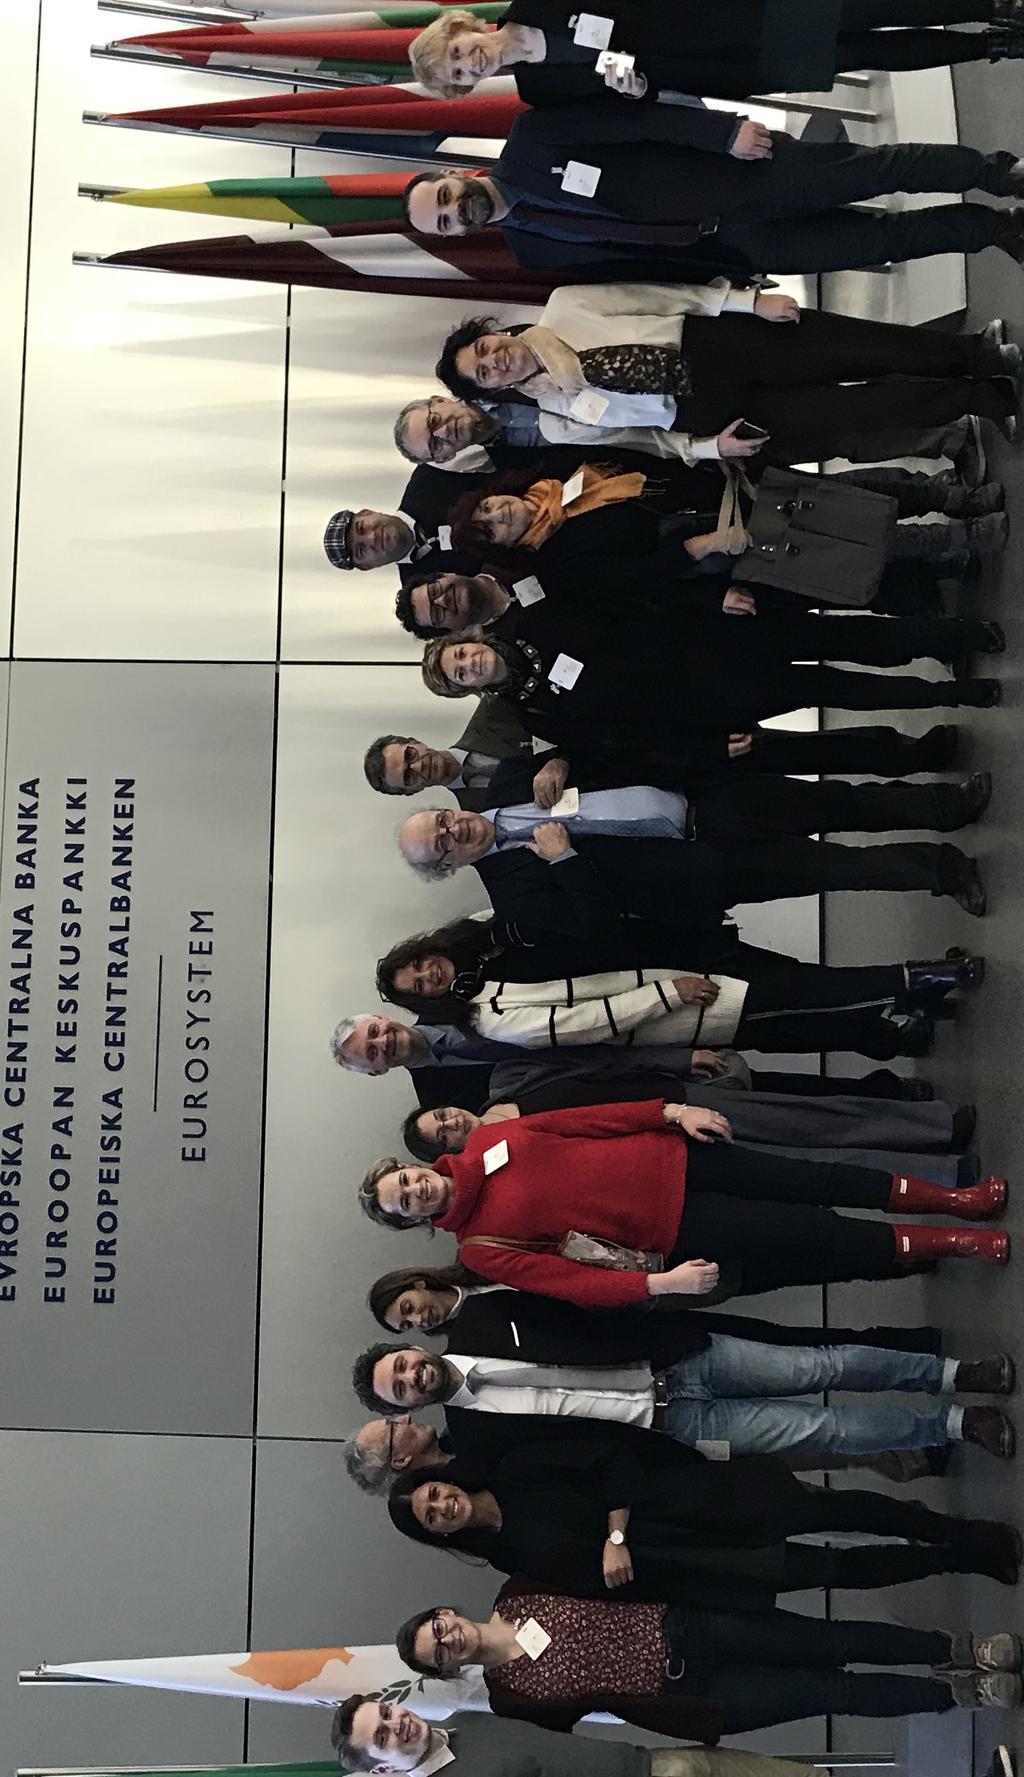 Editorial In this picture you can see the members of the EDELNet group visiting the European Central Bank in Frankfurt as a complement to the week of work that took place in the Study associated